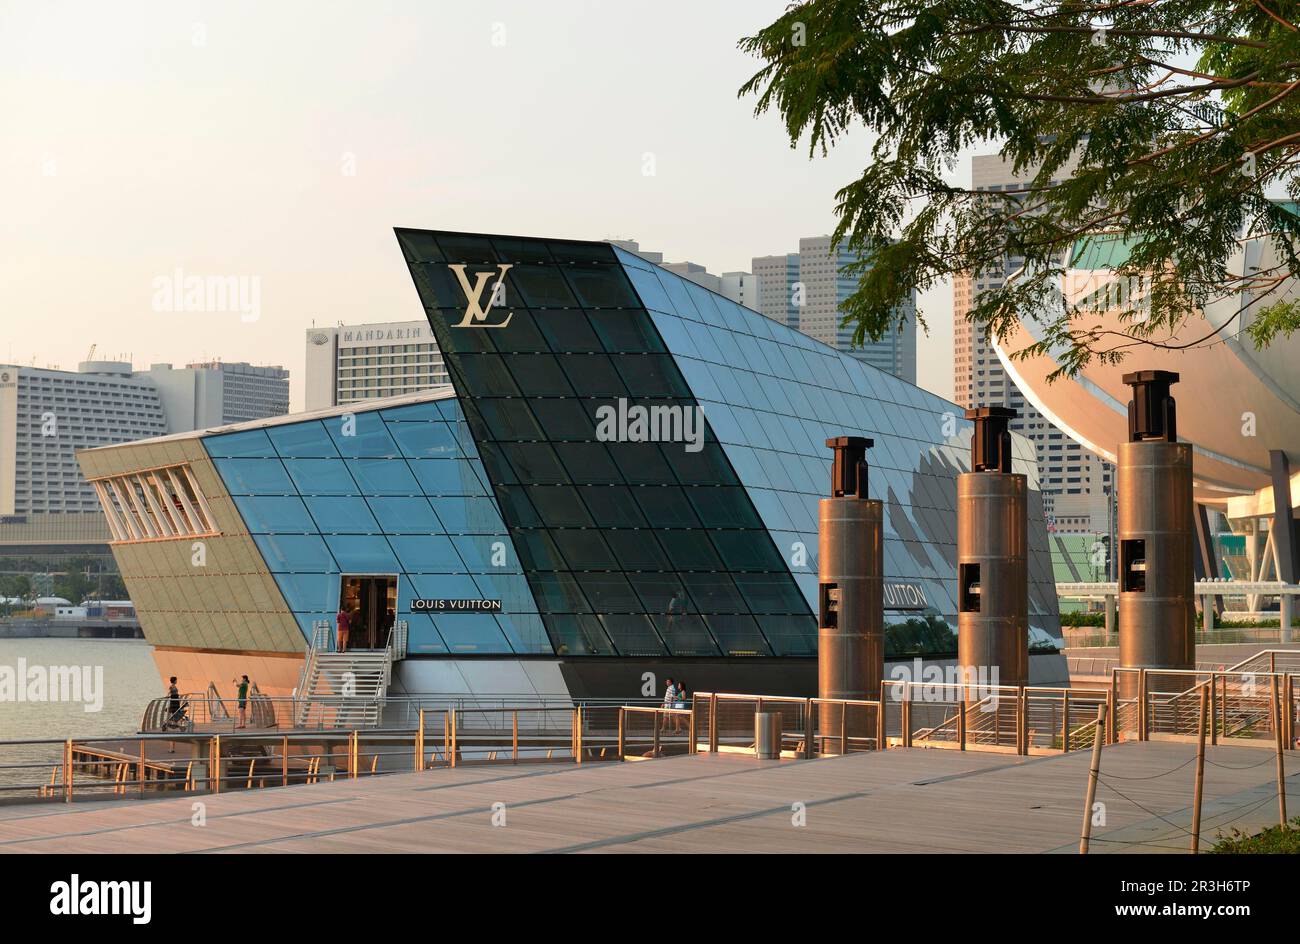 Singapore, Republic of Singapore, Asia - Louis Vuitton luxury boutique at Marina  Bay with the city skyline of the central business district in the bac -  SuperStock